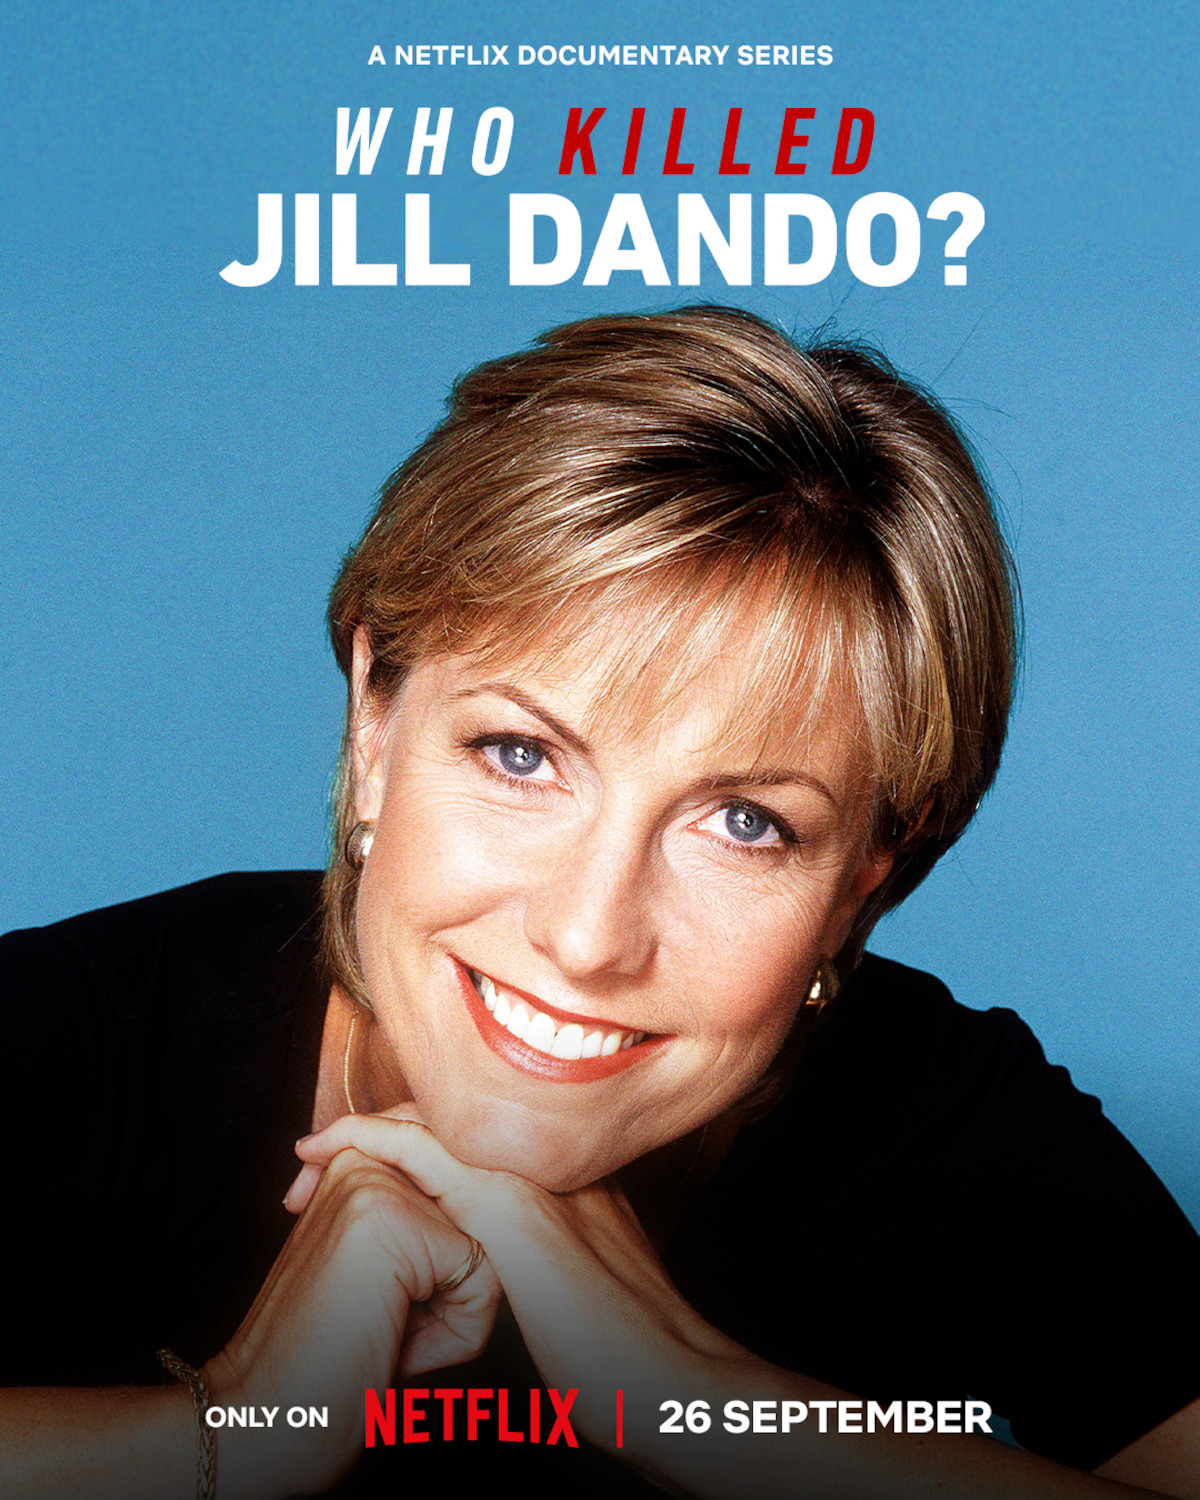 I Just Want To Be Killed Who Killed Jill Dando?' Learn Who She Was and the True Story of Her Murder  in the New Documentary - Netflix Tudum